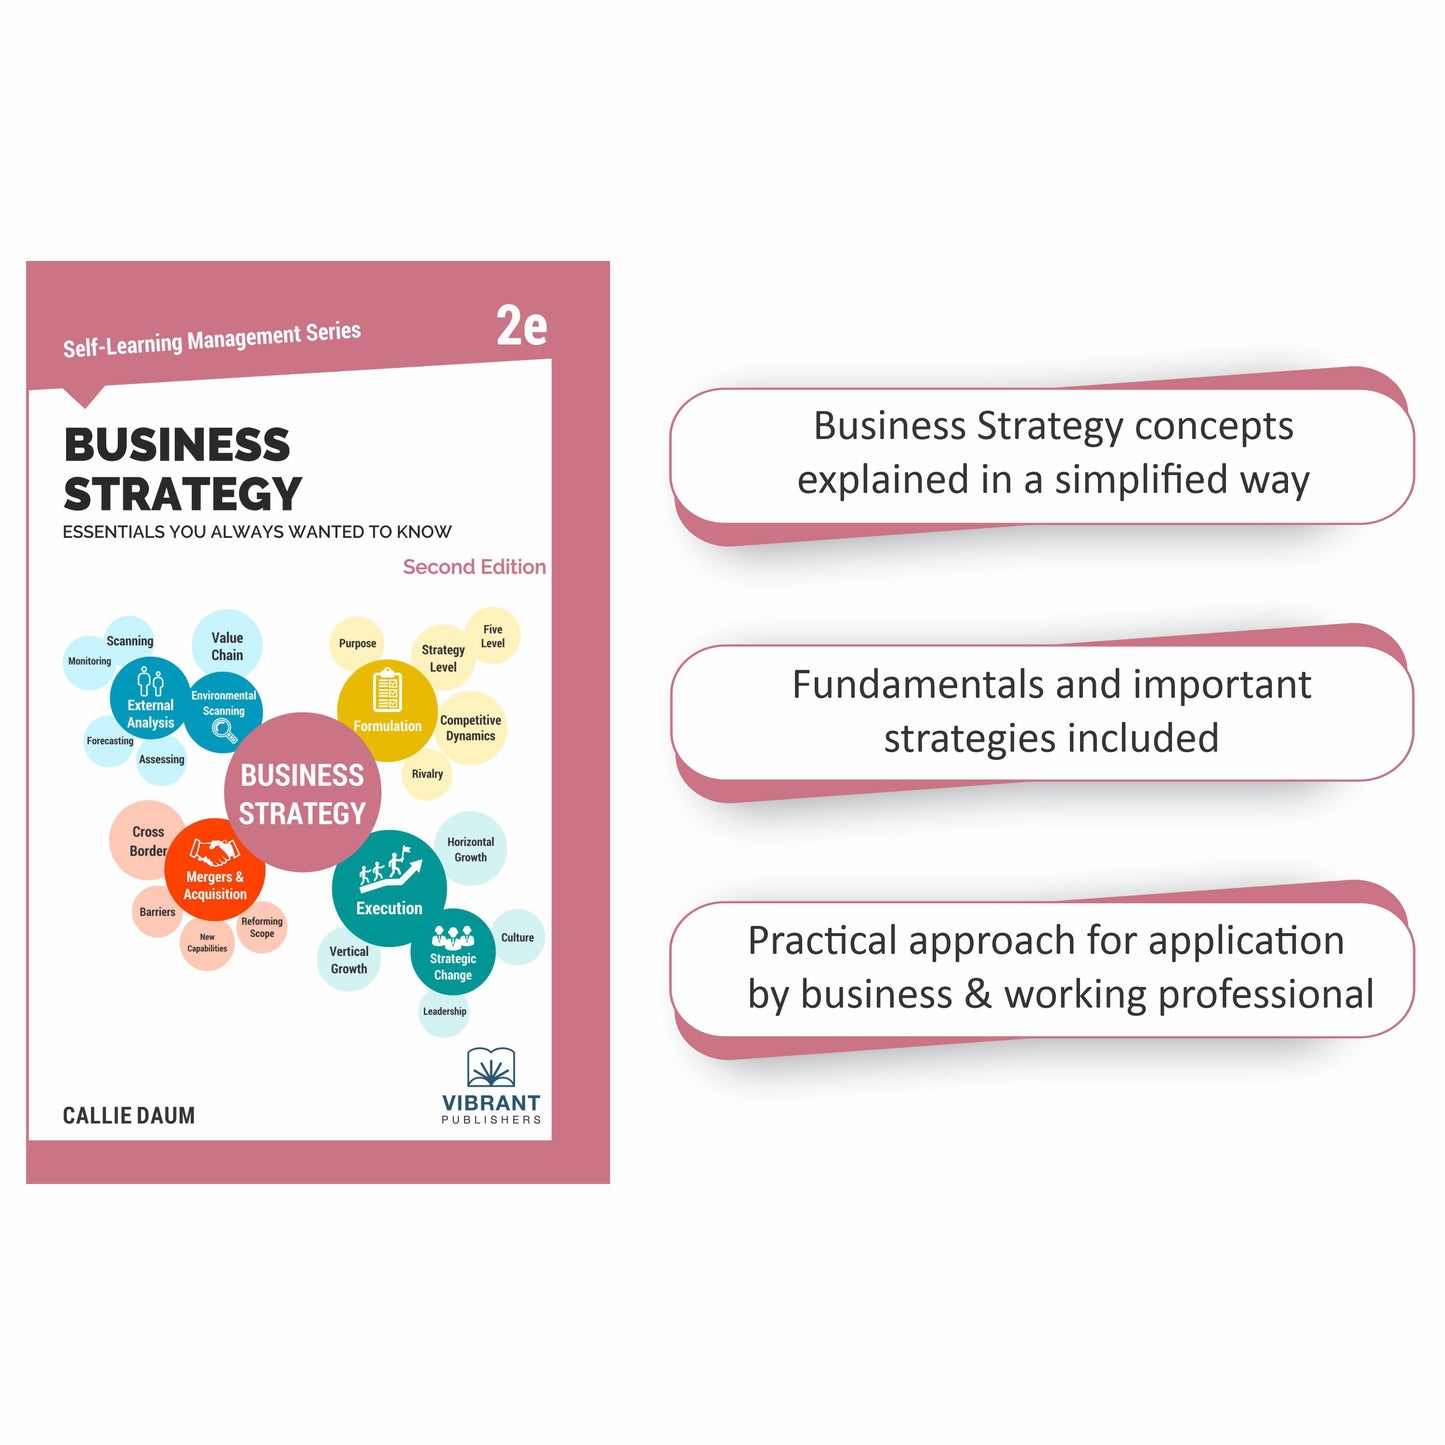 Entrepreneurship and Strategy Essentials for new and experienced entrepreneurs - Includes books on strategy, planning, and entrepreneurship